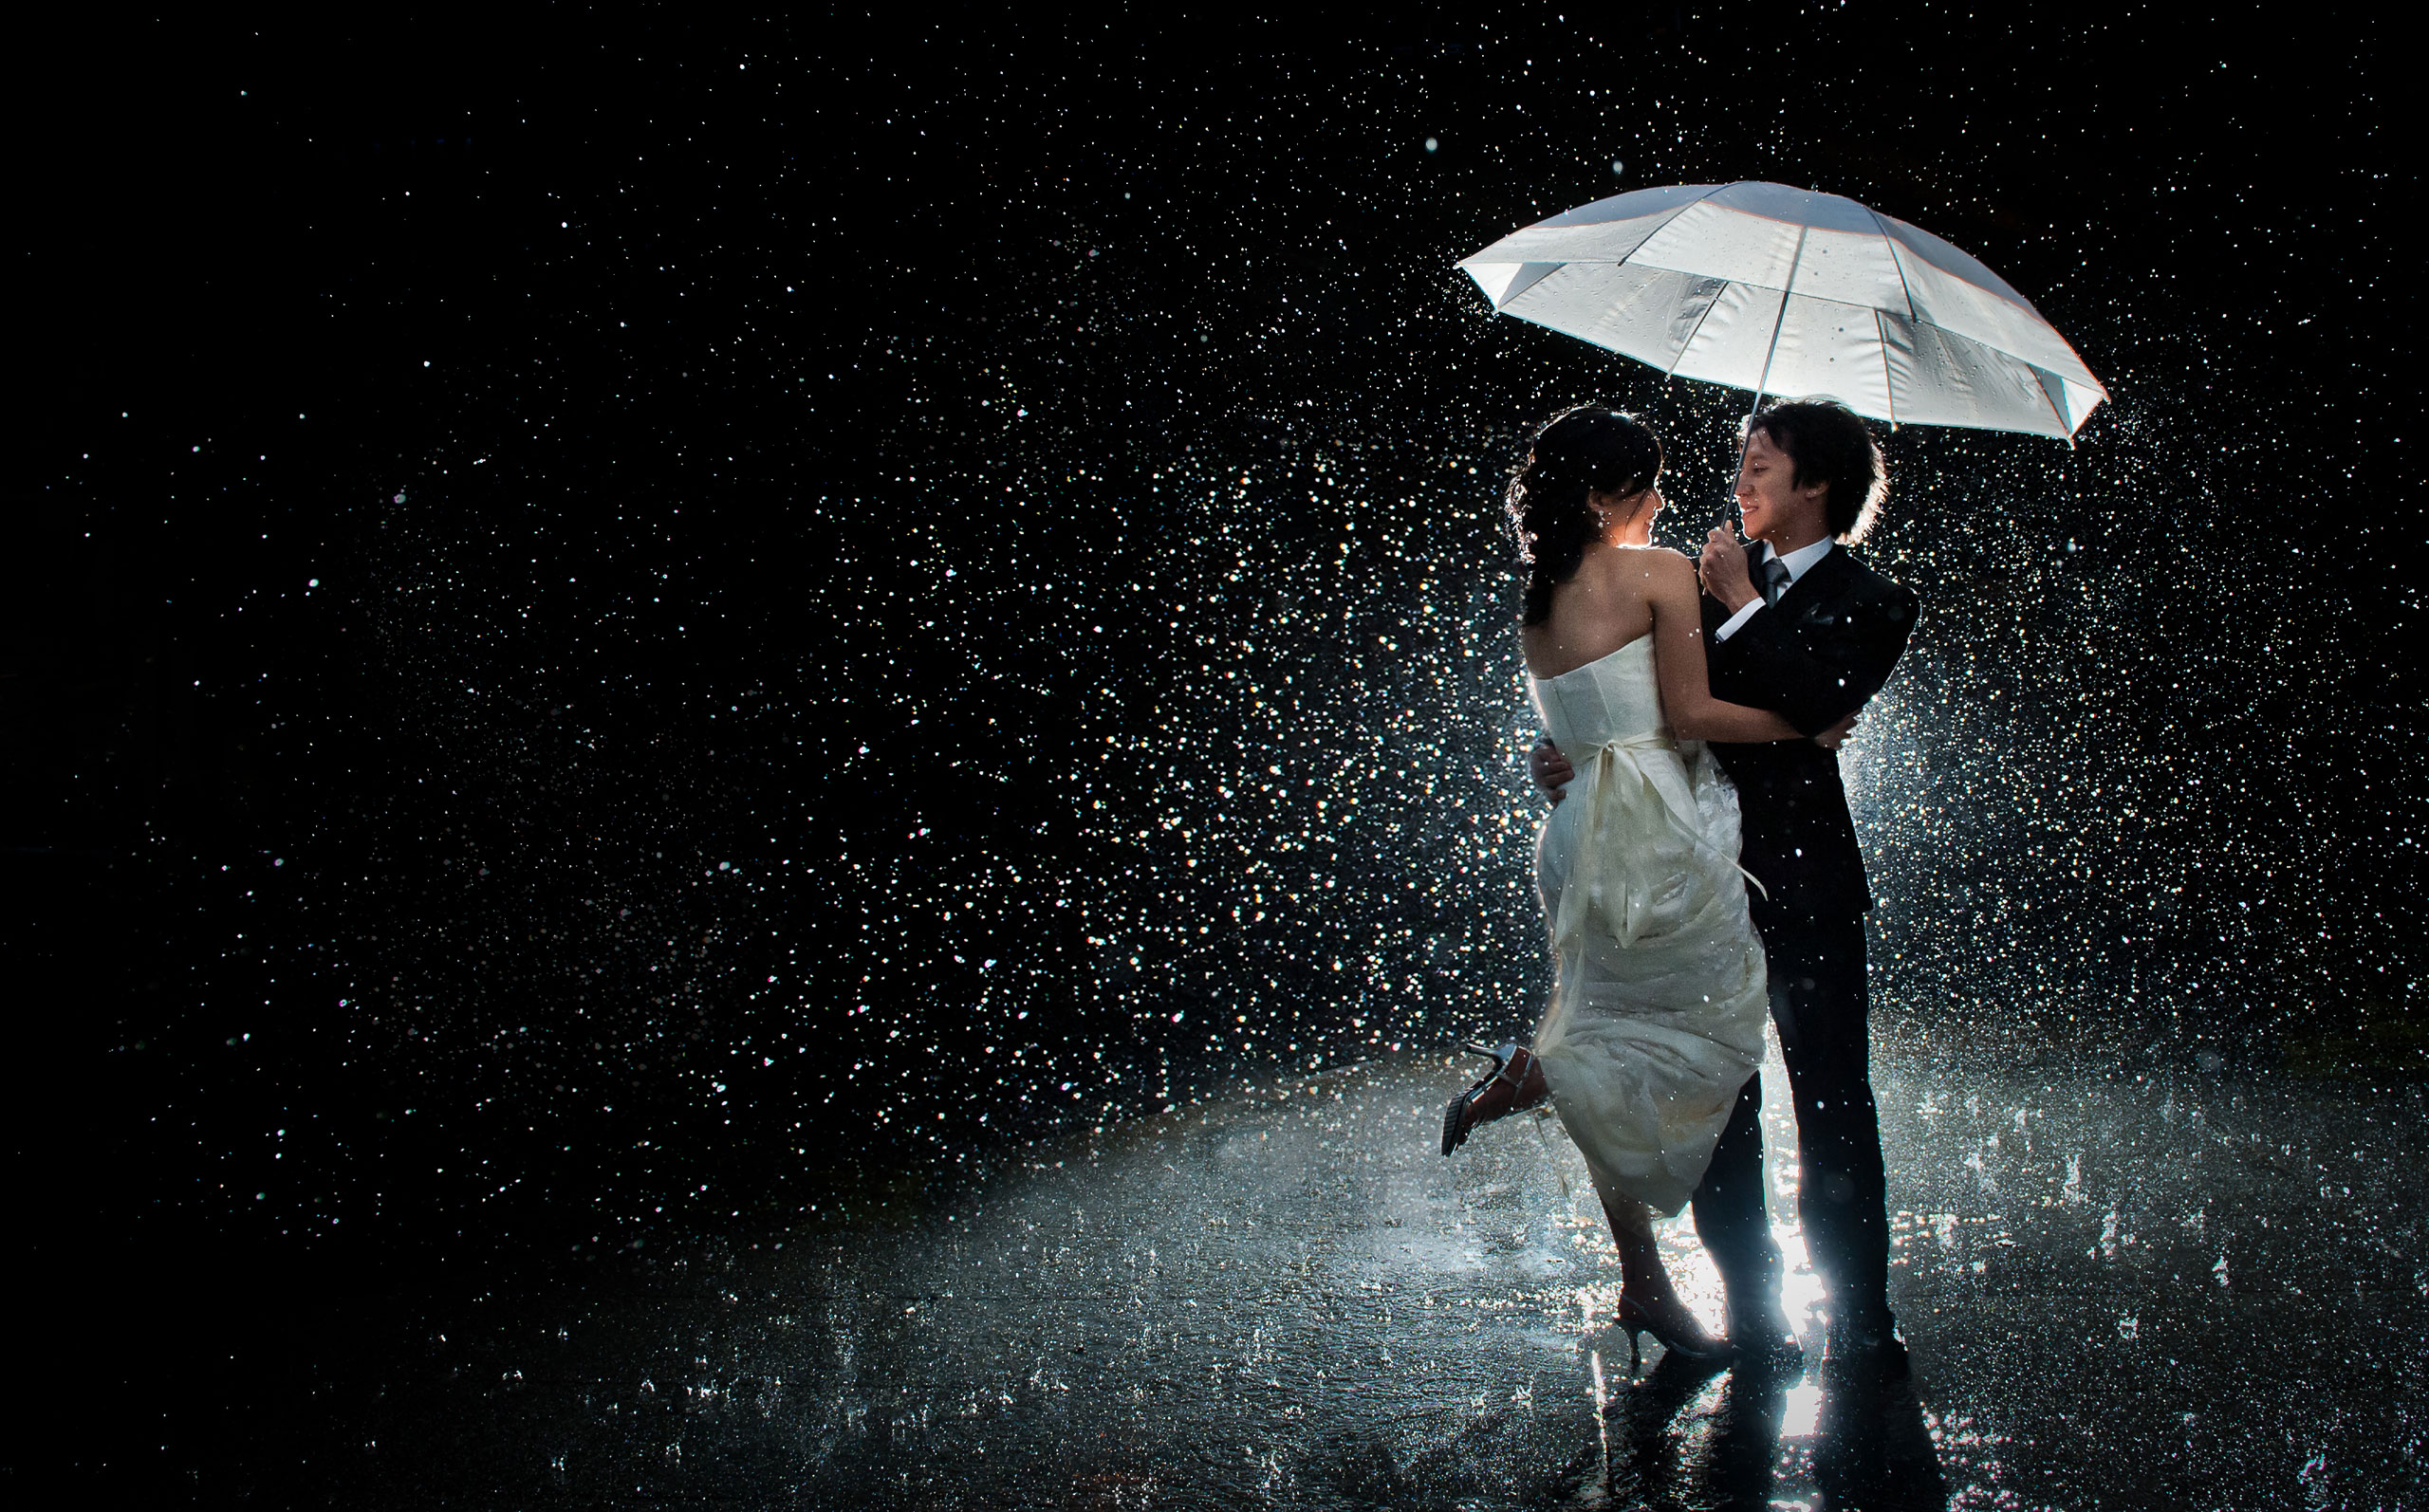 Dancing in the rain should be timed